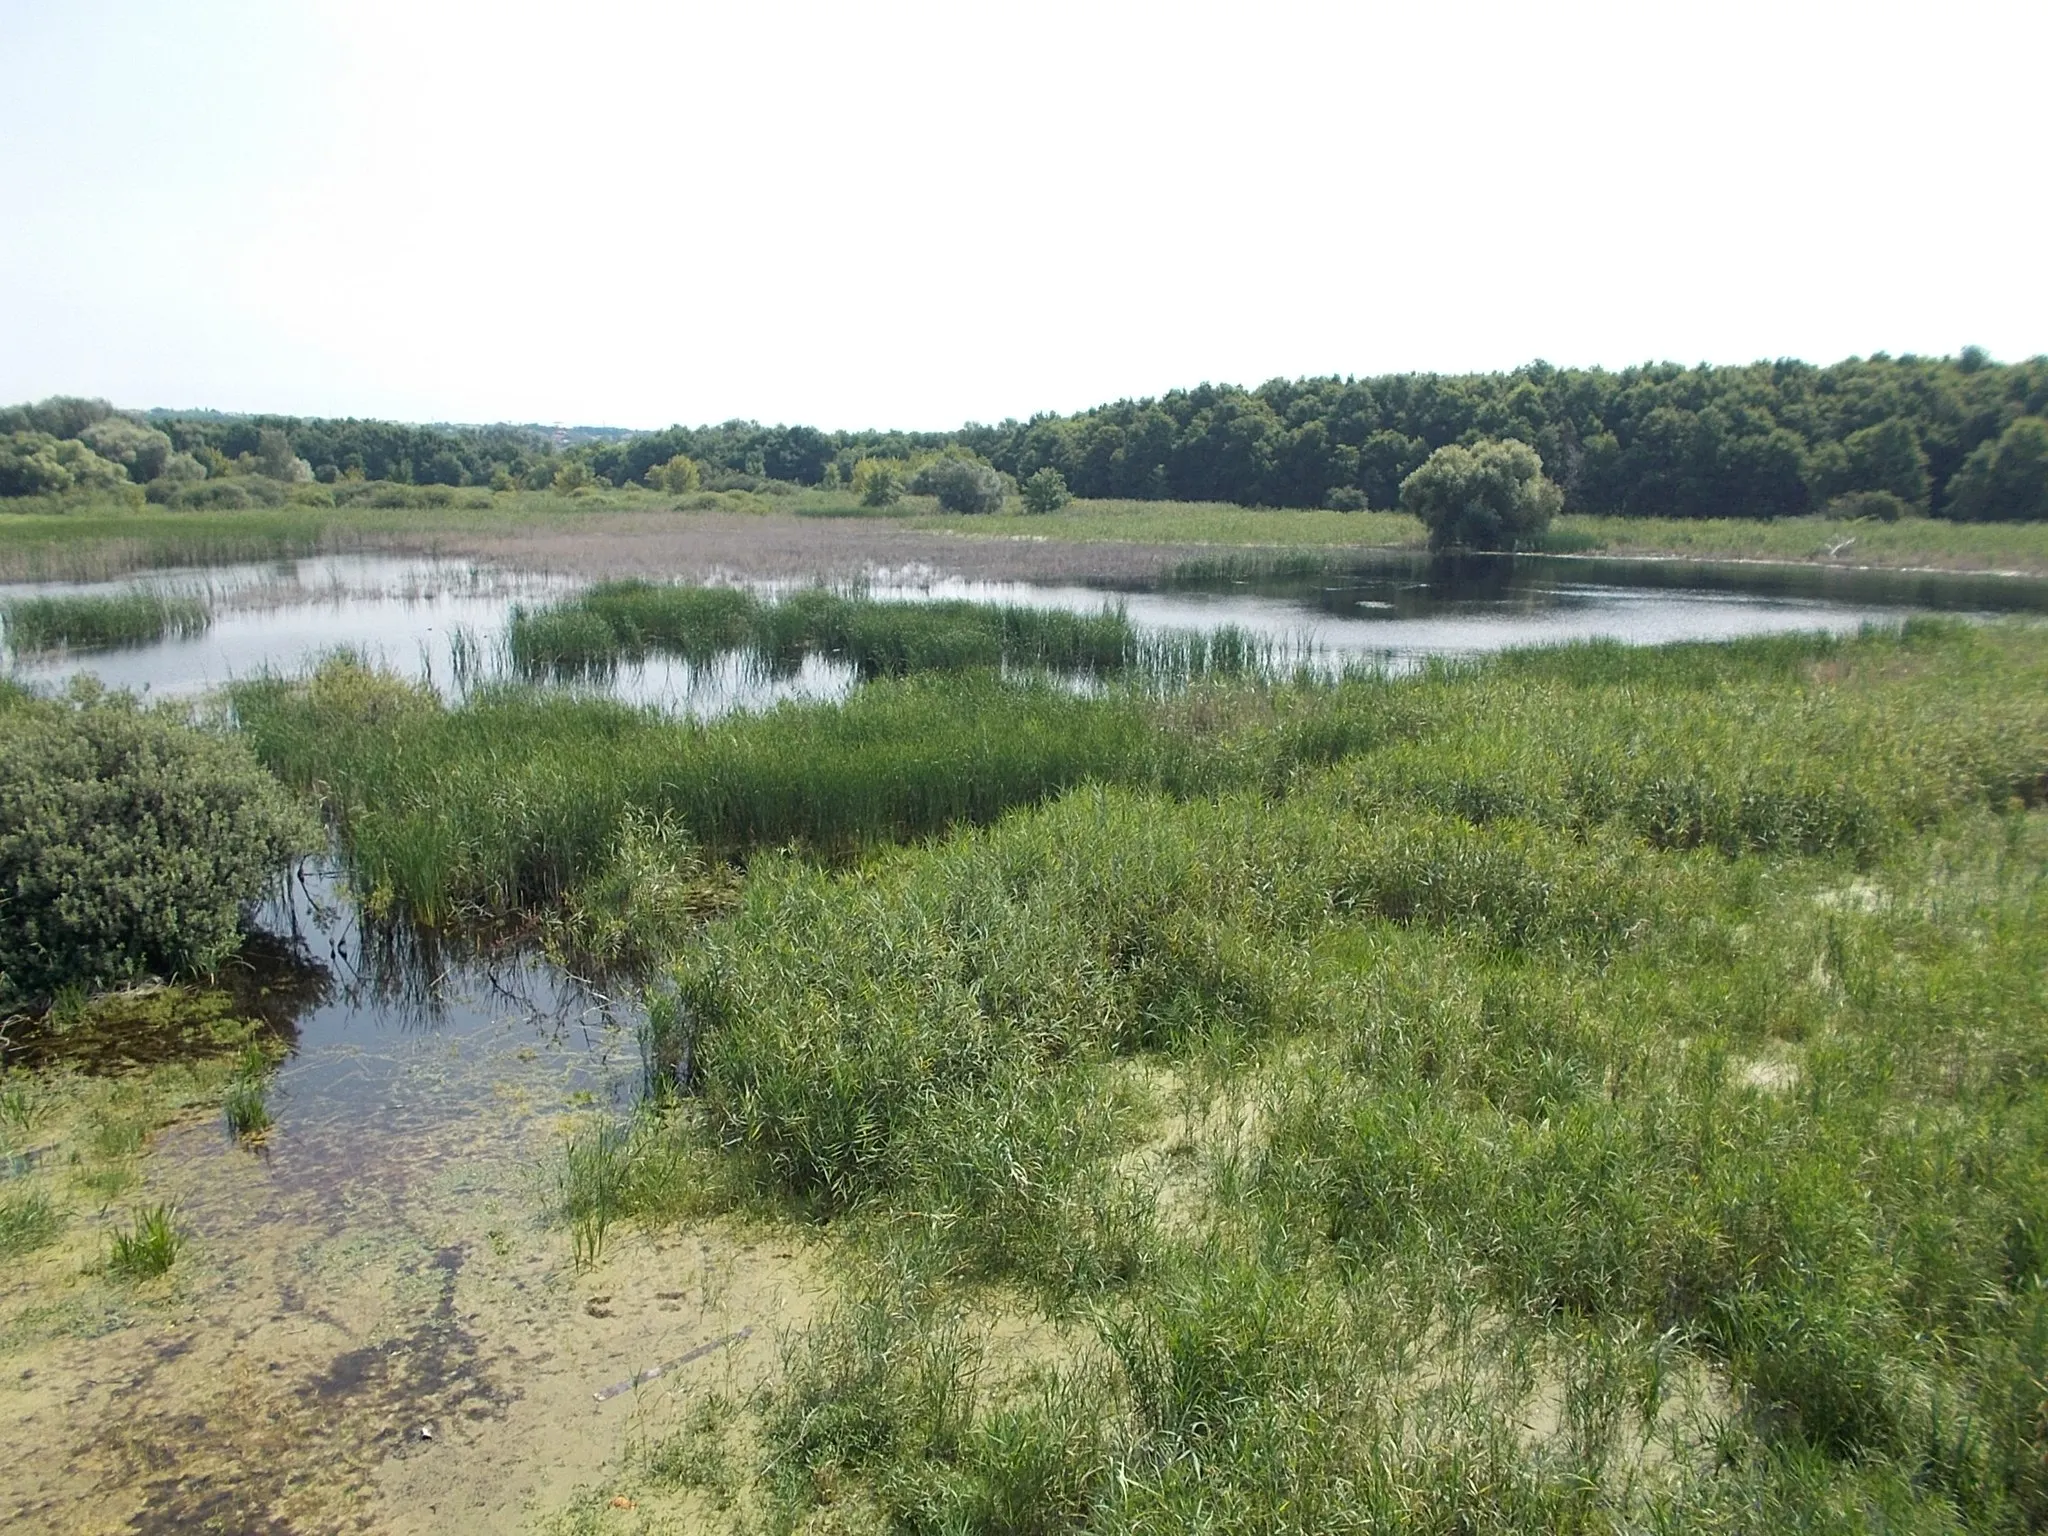 Photo showing: : Merzse Marsh Nature Trail at 5th station. The Merzse Marsh is one of the few wetlwnd habitats in the capital with undisturbed water and uliginal vegetation and an adjoining bog field. The open water surface of the marsh offers nesting sites for water fowl. The marsh has dried up in several occasions in the 1990s years. Now, wells have been drilled to ensure the adequete water supply and attemps have been made to conserve the accustomed conditions for wildlife by a system of ditches of several kilometers long. Visiting is restricted in order to preserve the ecosystem of the marsh. Under protection of the Budapest Municipality since 1977. Get in: train from Keleti pályaudvar (Keleti railway station)  and take off  at Rákoskert station and walk to south about half km. Source: Budapest's Protected Natural Heritage. Edited by Municipality of Budapest in 1996. Supported by Phare (EU project), ISBN 9630471523. - Rákoshegy, Budapest District XVII.